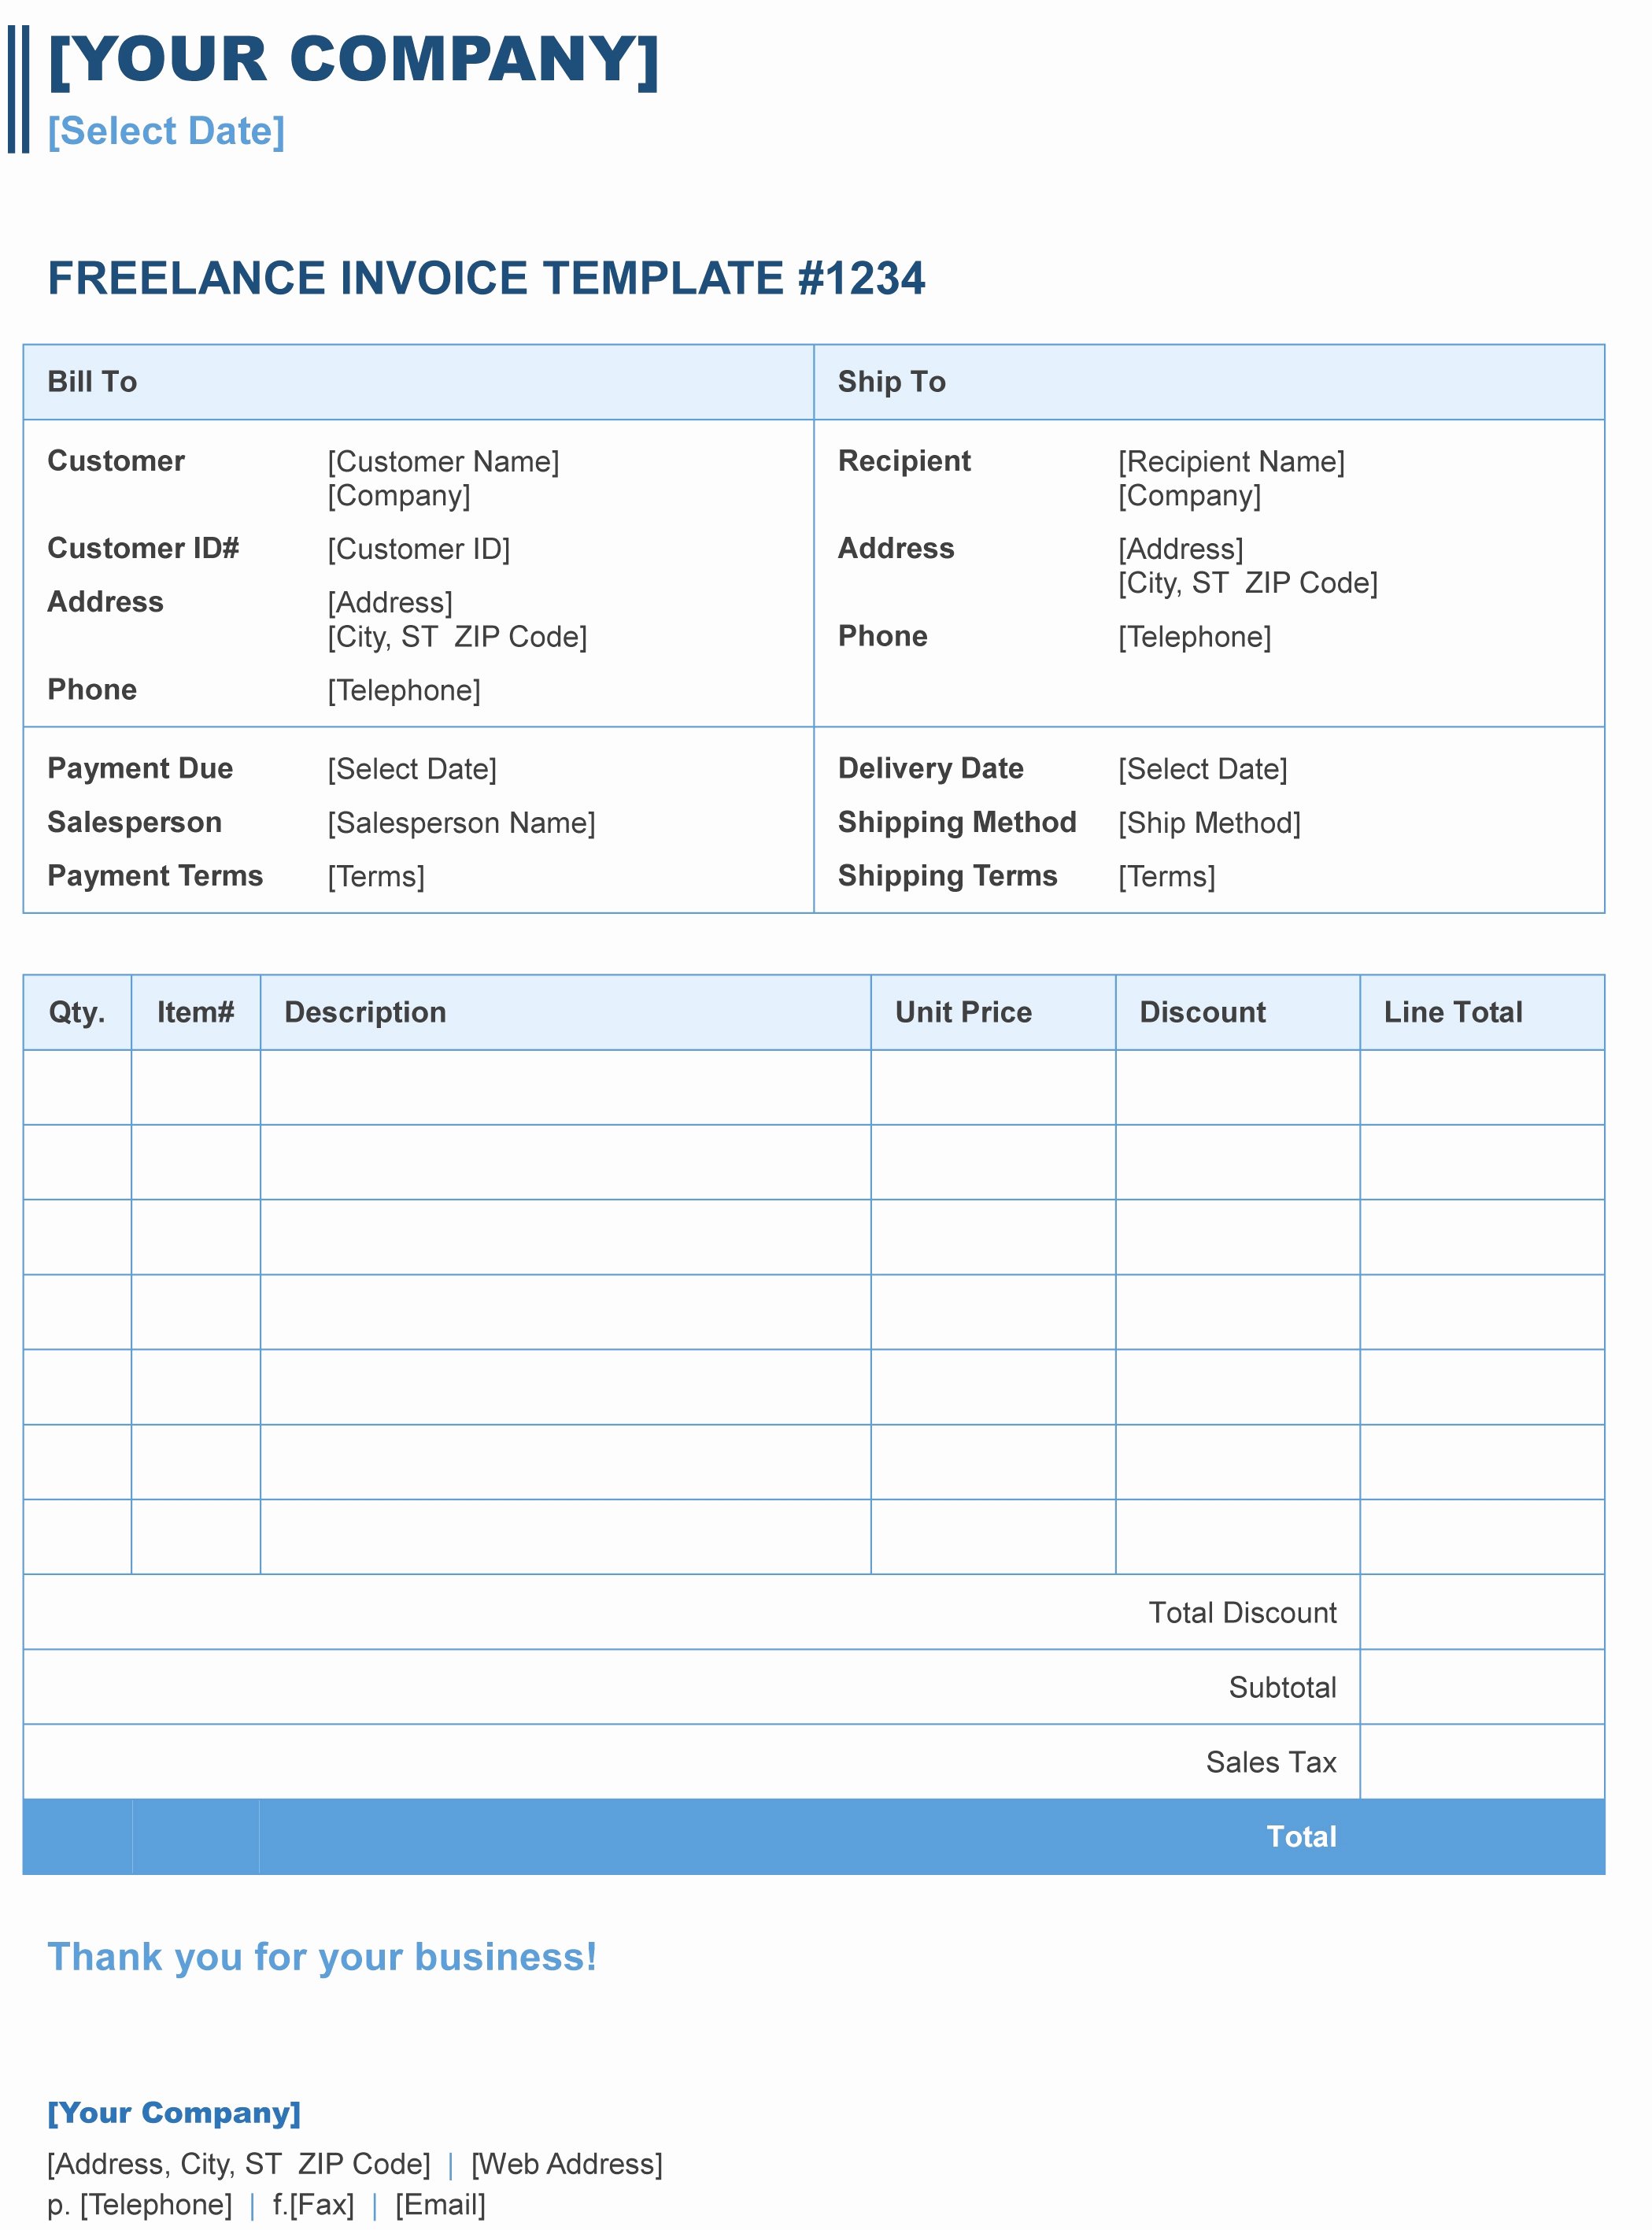 Freelance Writer Invoice Template New Freelance Invoice Template Excel